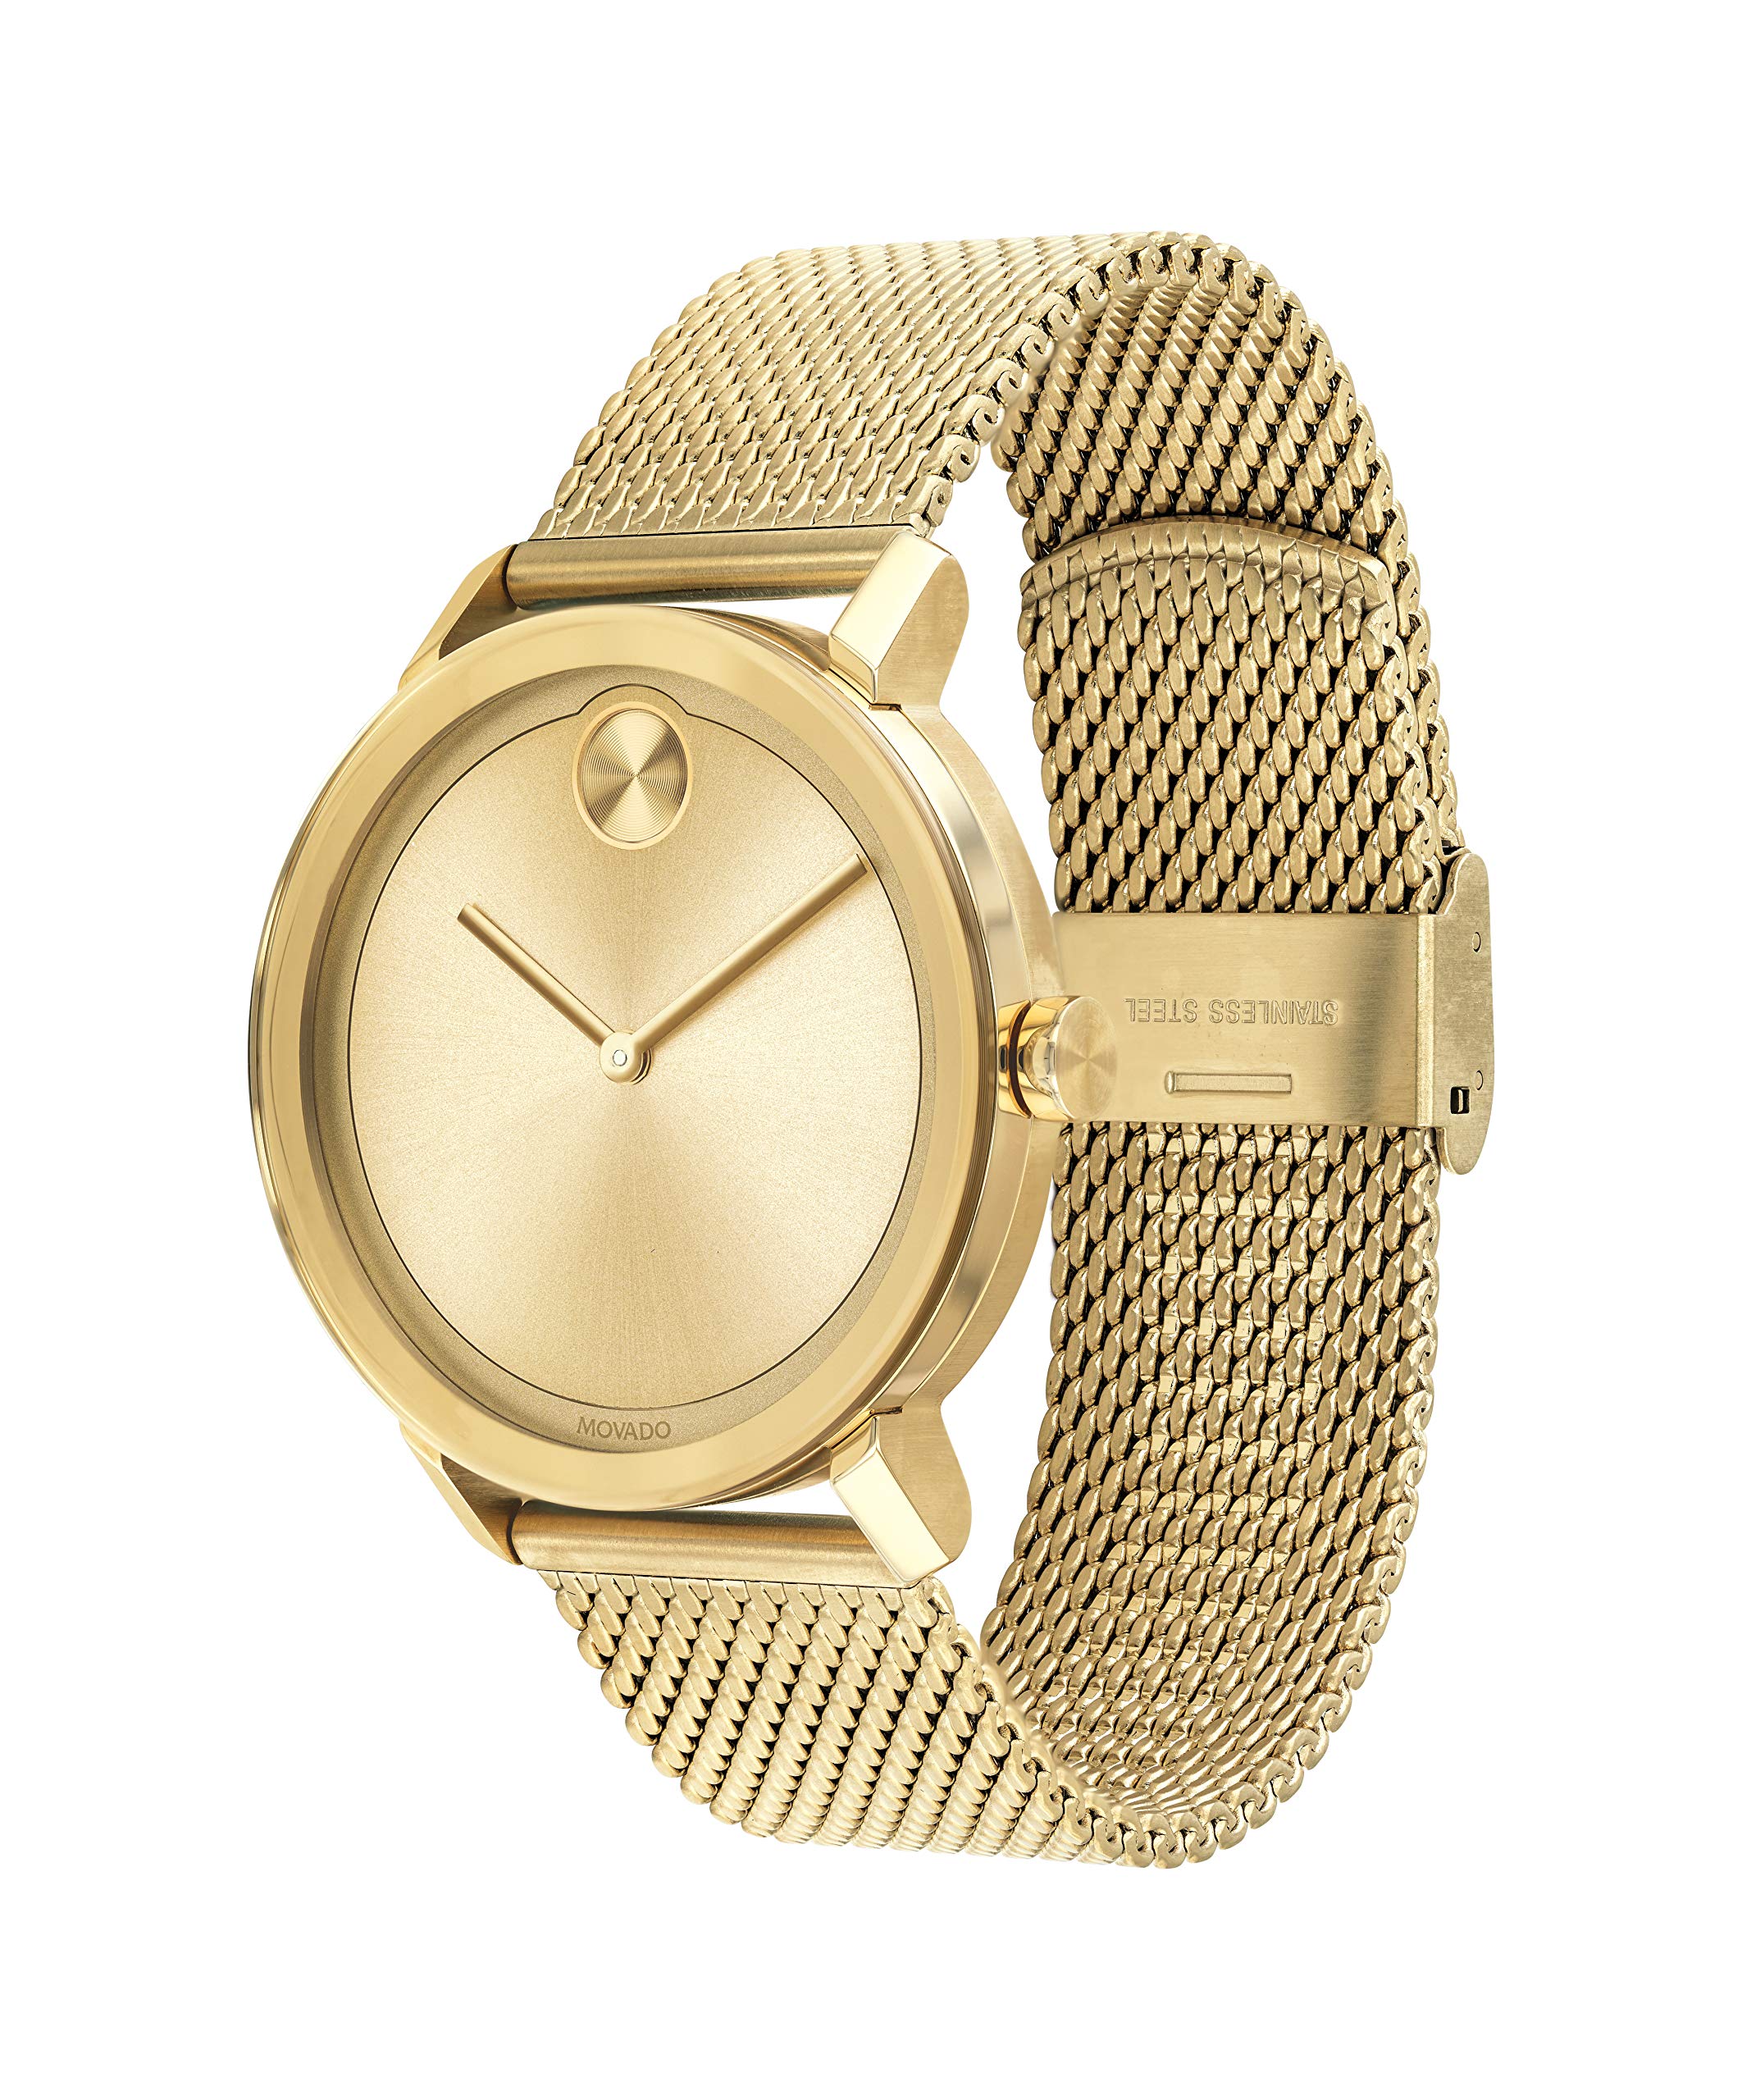 Movado Men's Bold Evolution Pale Yellow Gold Ion-Plated Steel Case and Mesh Bracelet, Yellow Gold